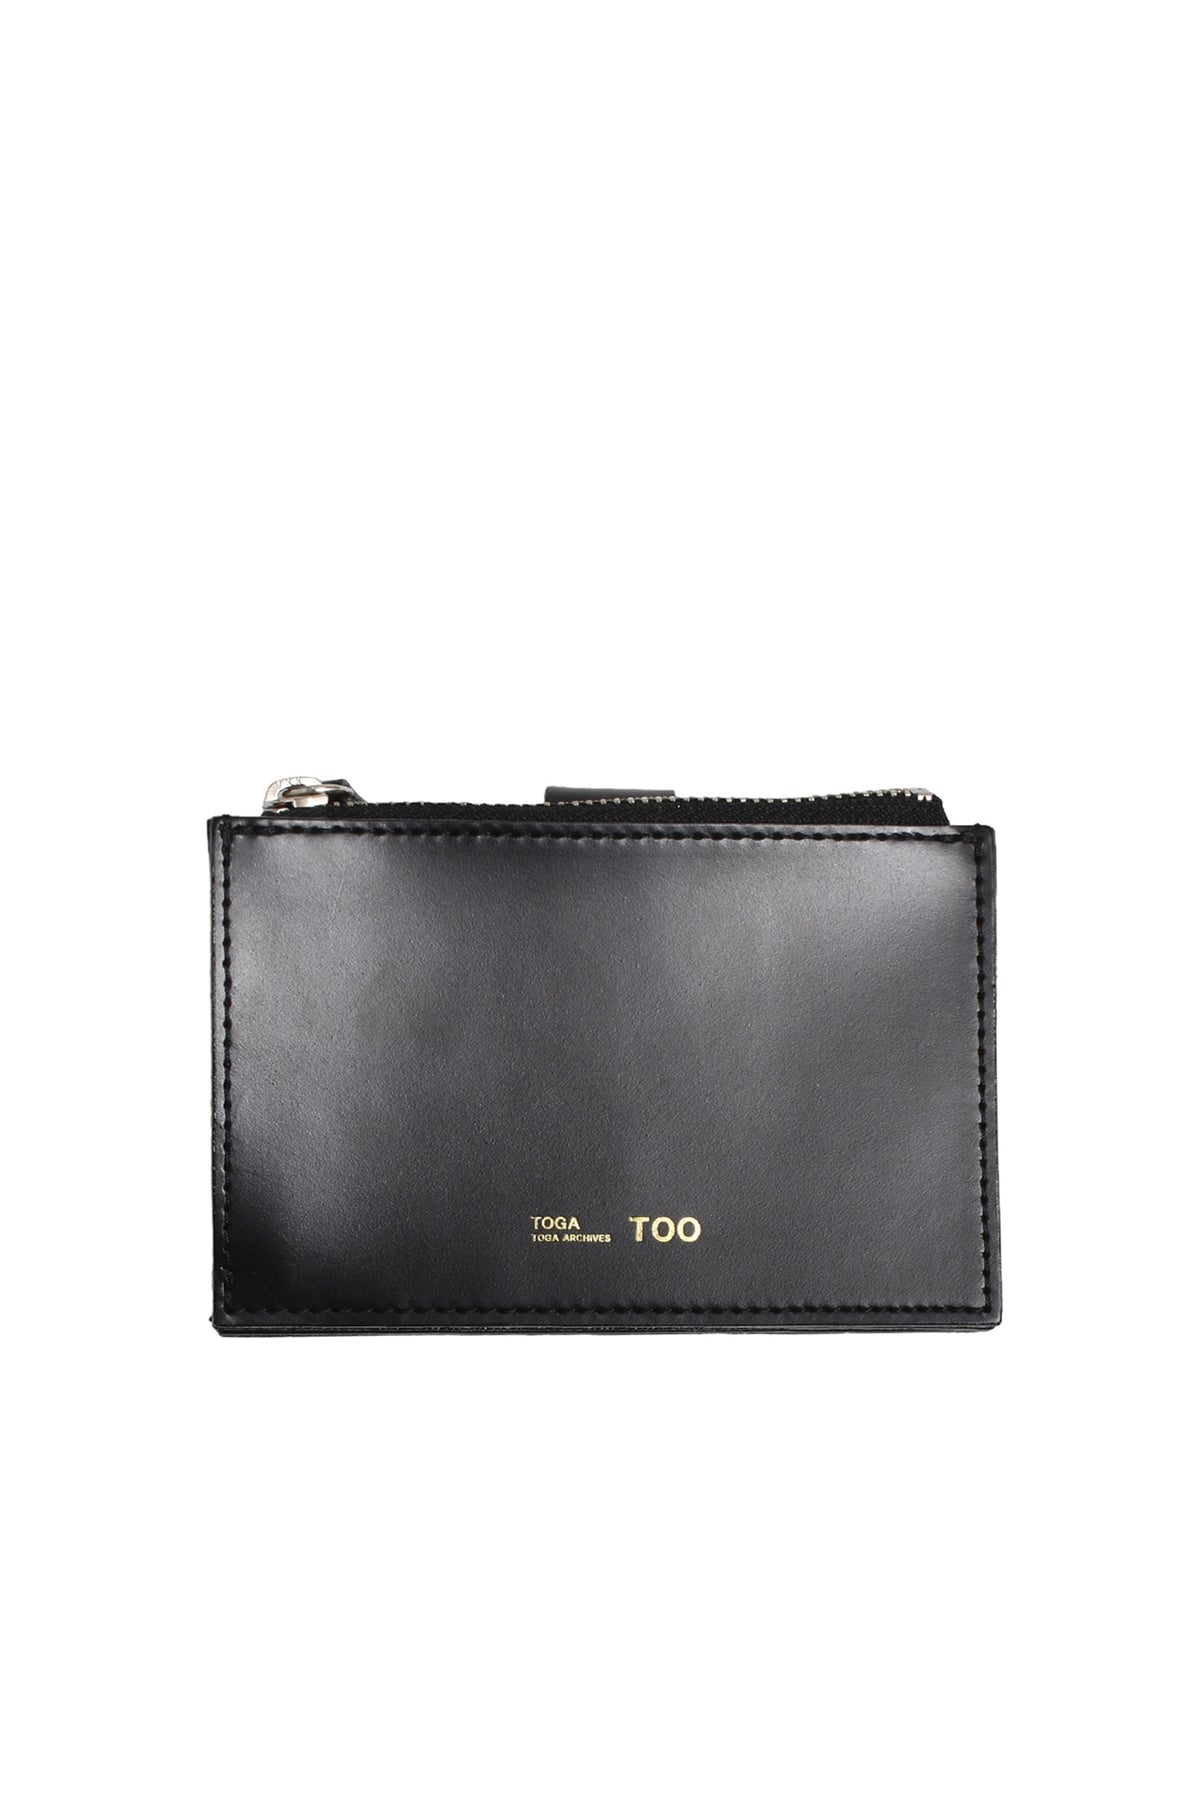 TOGA トーガSS24 LEATHER WALLET STUDS SMALL / BLK - NUBIAN